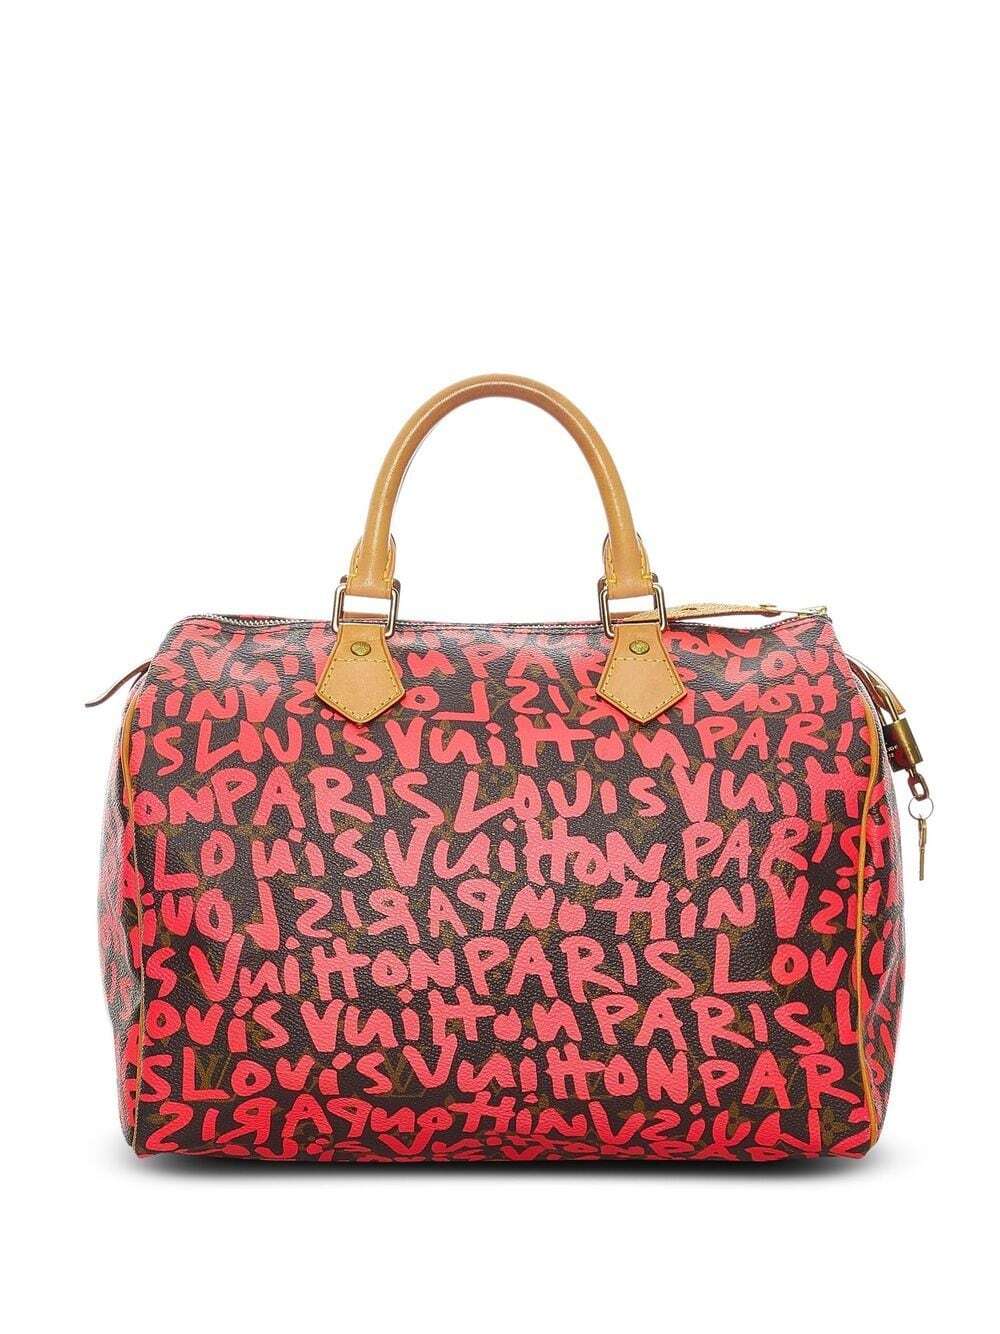 Louis Vuitton Pre-Owned x Stephen Sprouse 2008 pre-owned Speedy 30 bag - Pink